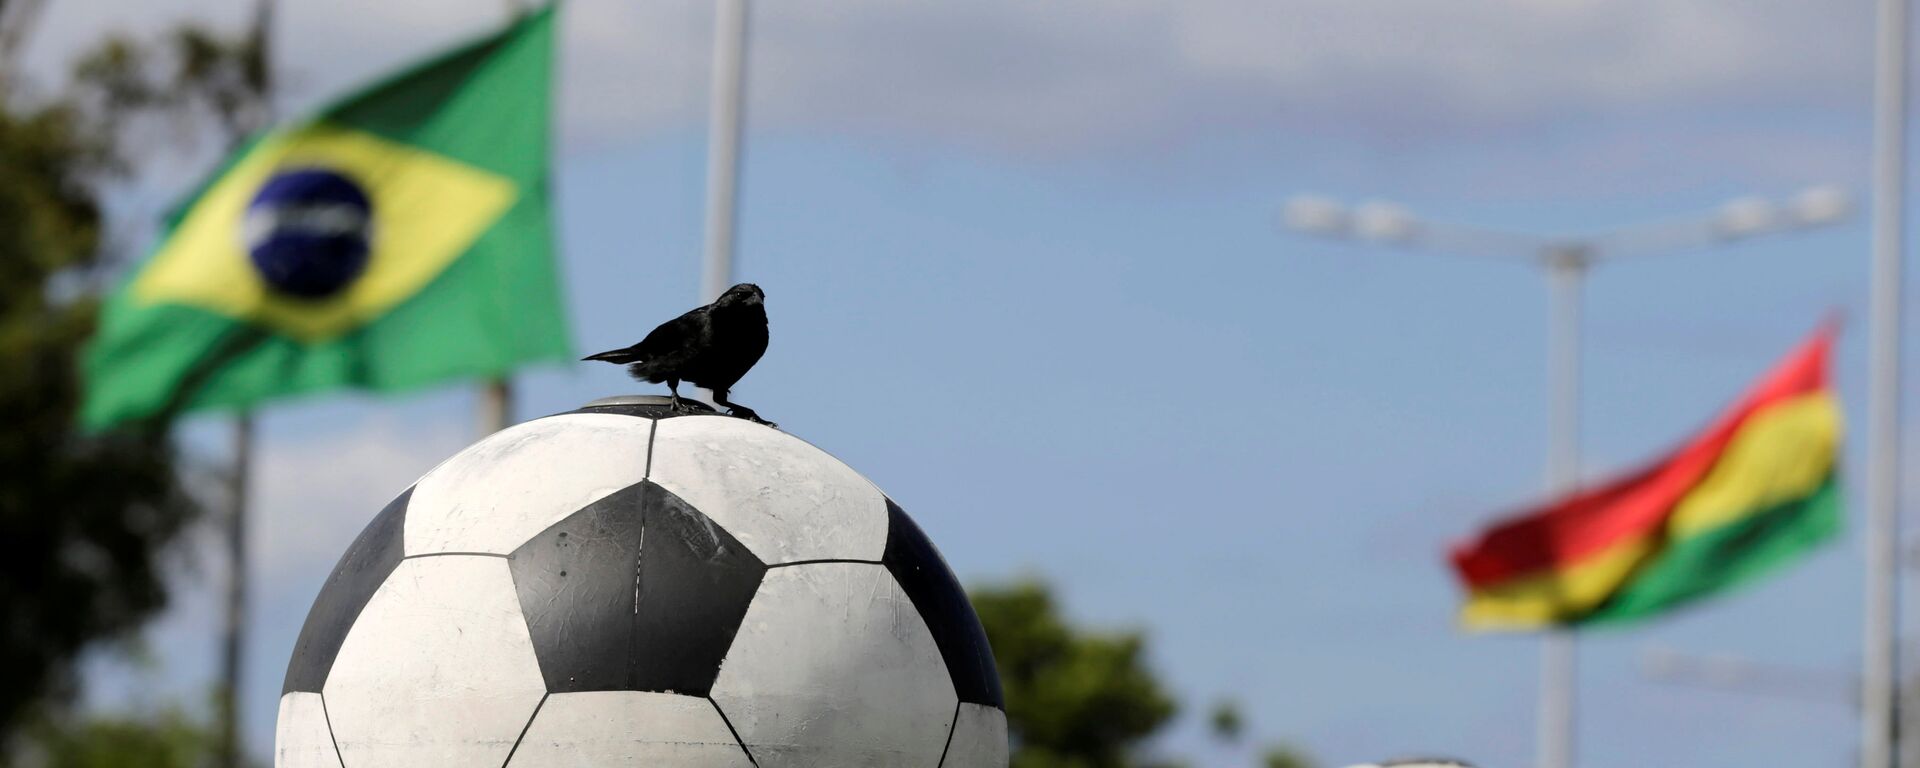 A bird sits on a ball in front of flags of Brazil and member countries of the South American Soccer Confederation (CONMEBOL) at half staff, paying tribute to members of Chapecoense soccer team in a plane crash in Colombia, in front of the headquarters in Luque, Paraguay - Sputnik Mundo, 1920, 12.06.2021